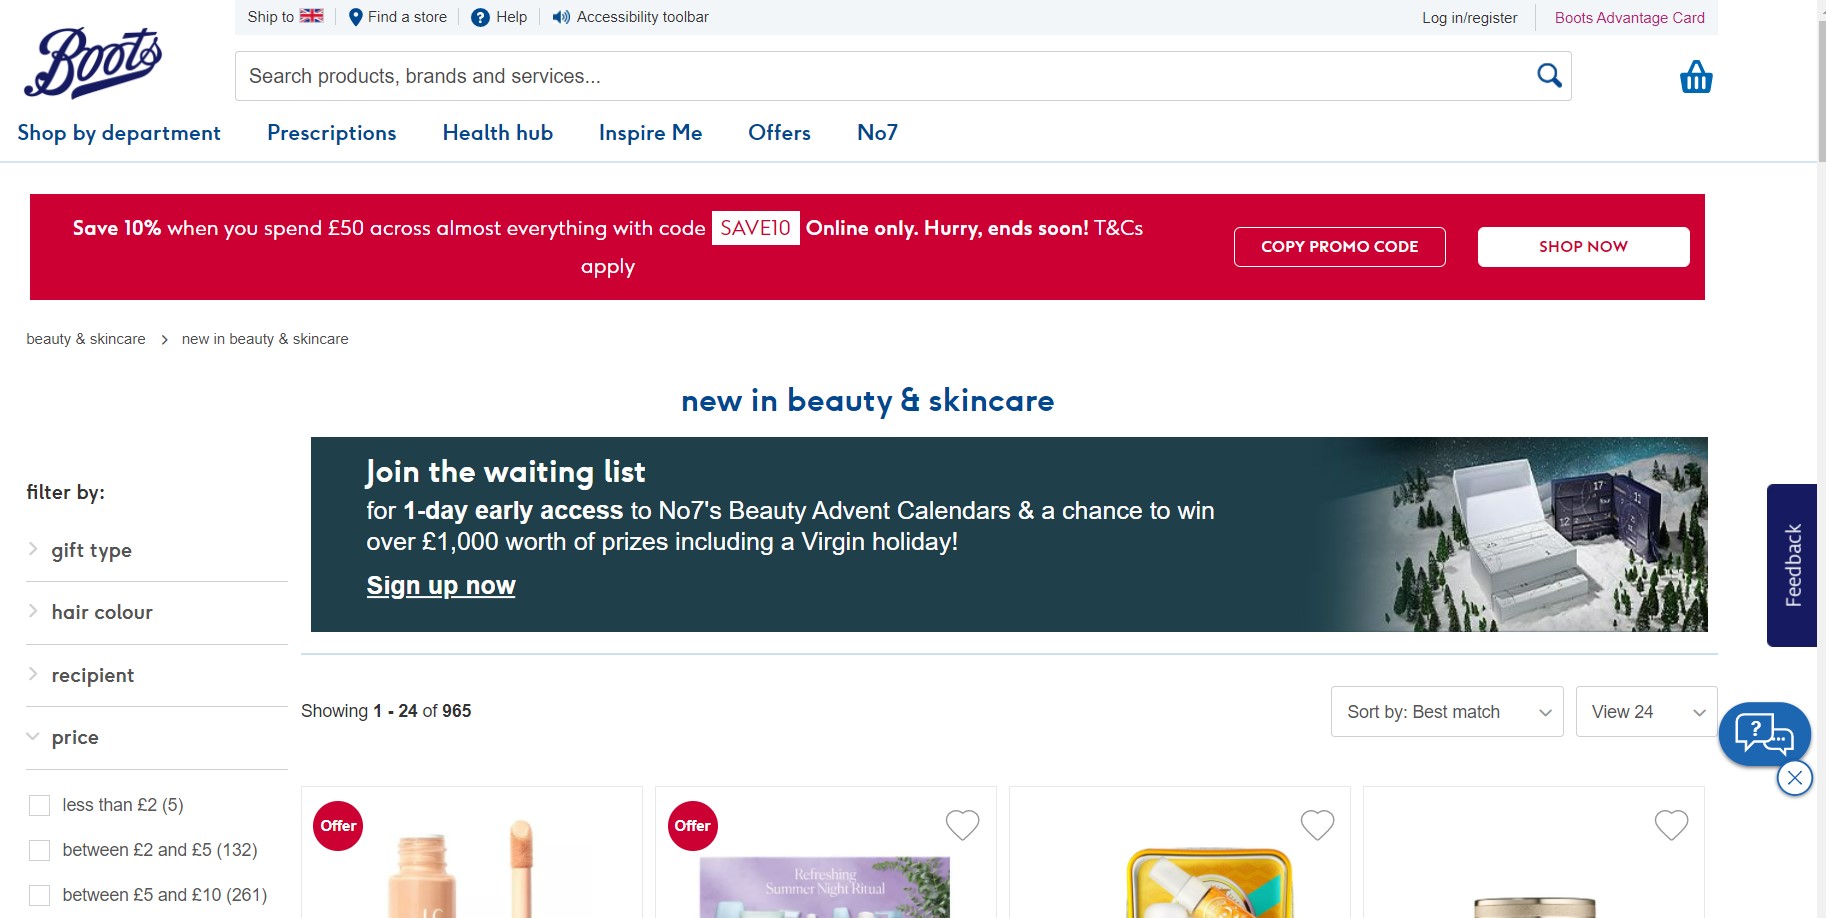 Boots launches new online marketplace